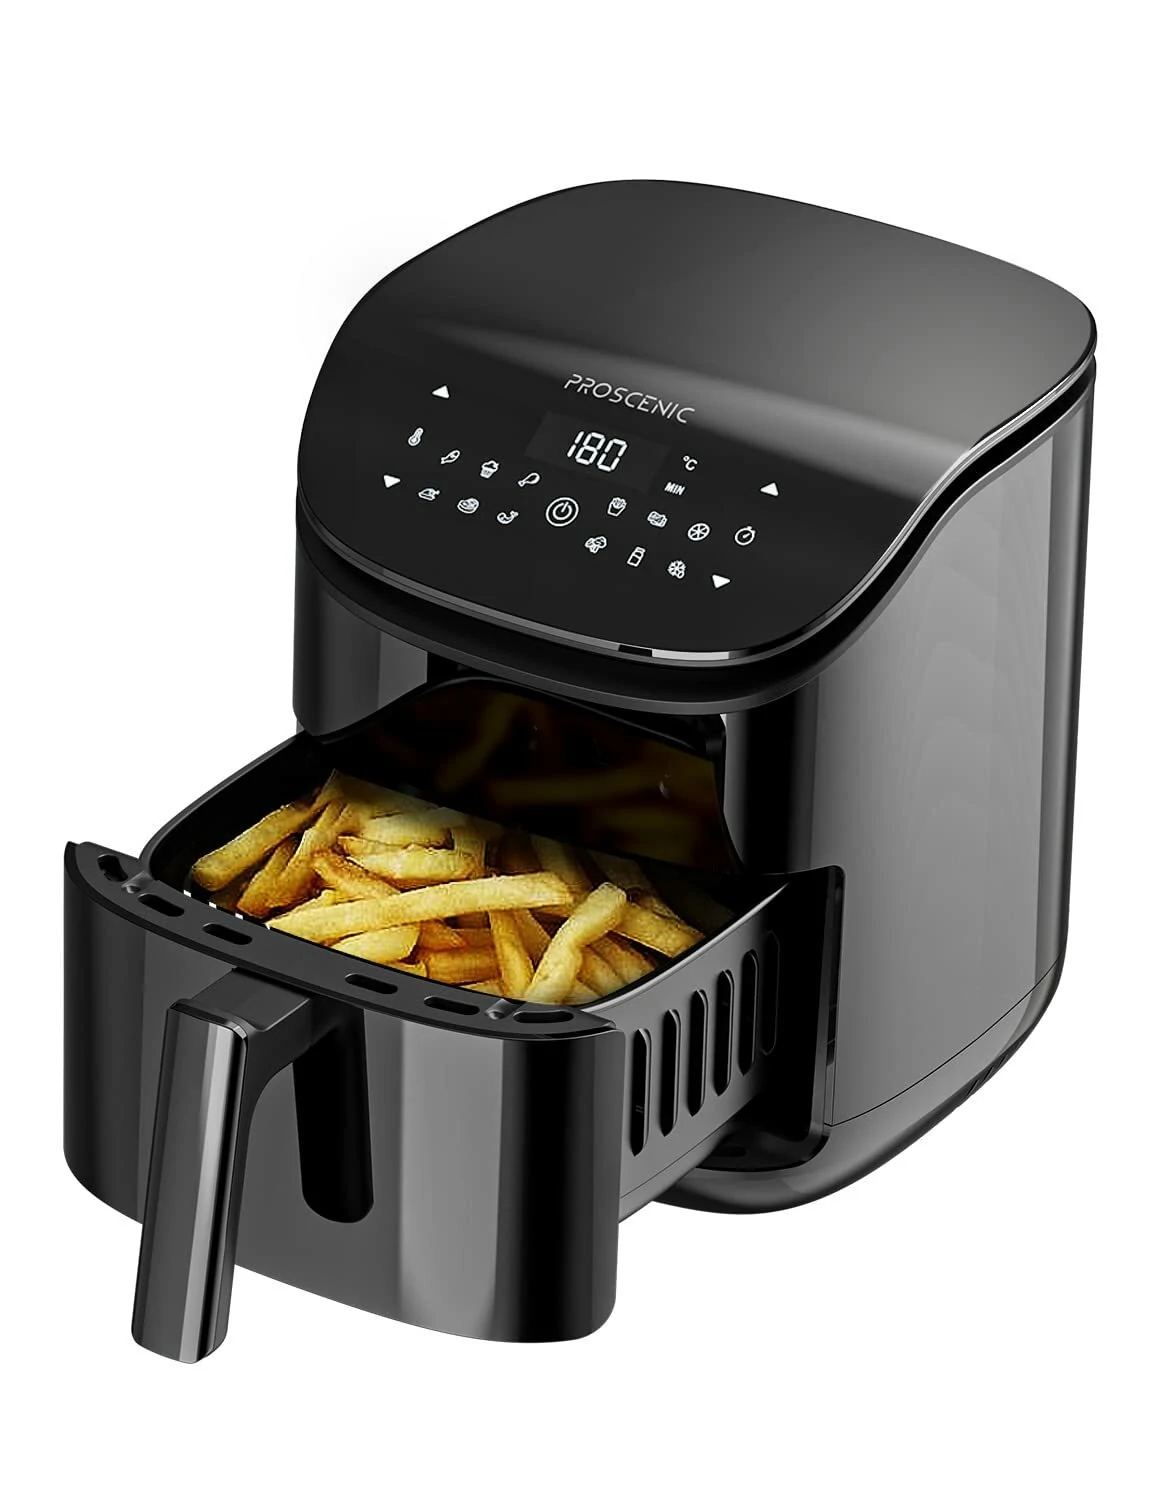 Proscenic T20 1500W Multifunctional Air Fryer With Smart Digital LED Touch-Screen Panel Oil-Free Fryer 220V EU Plug